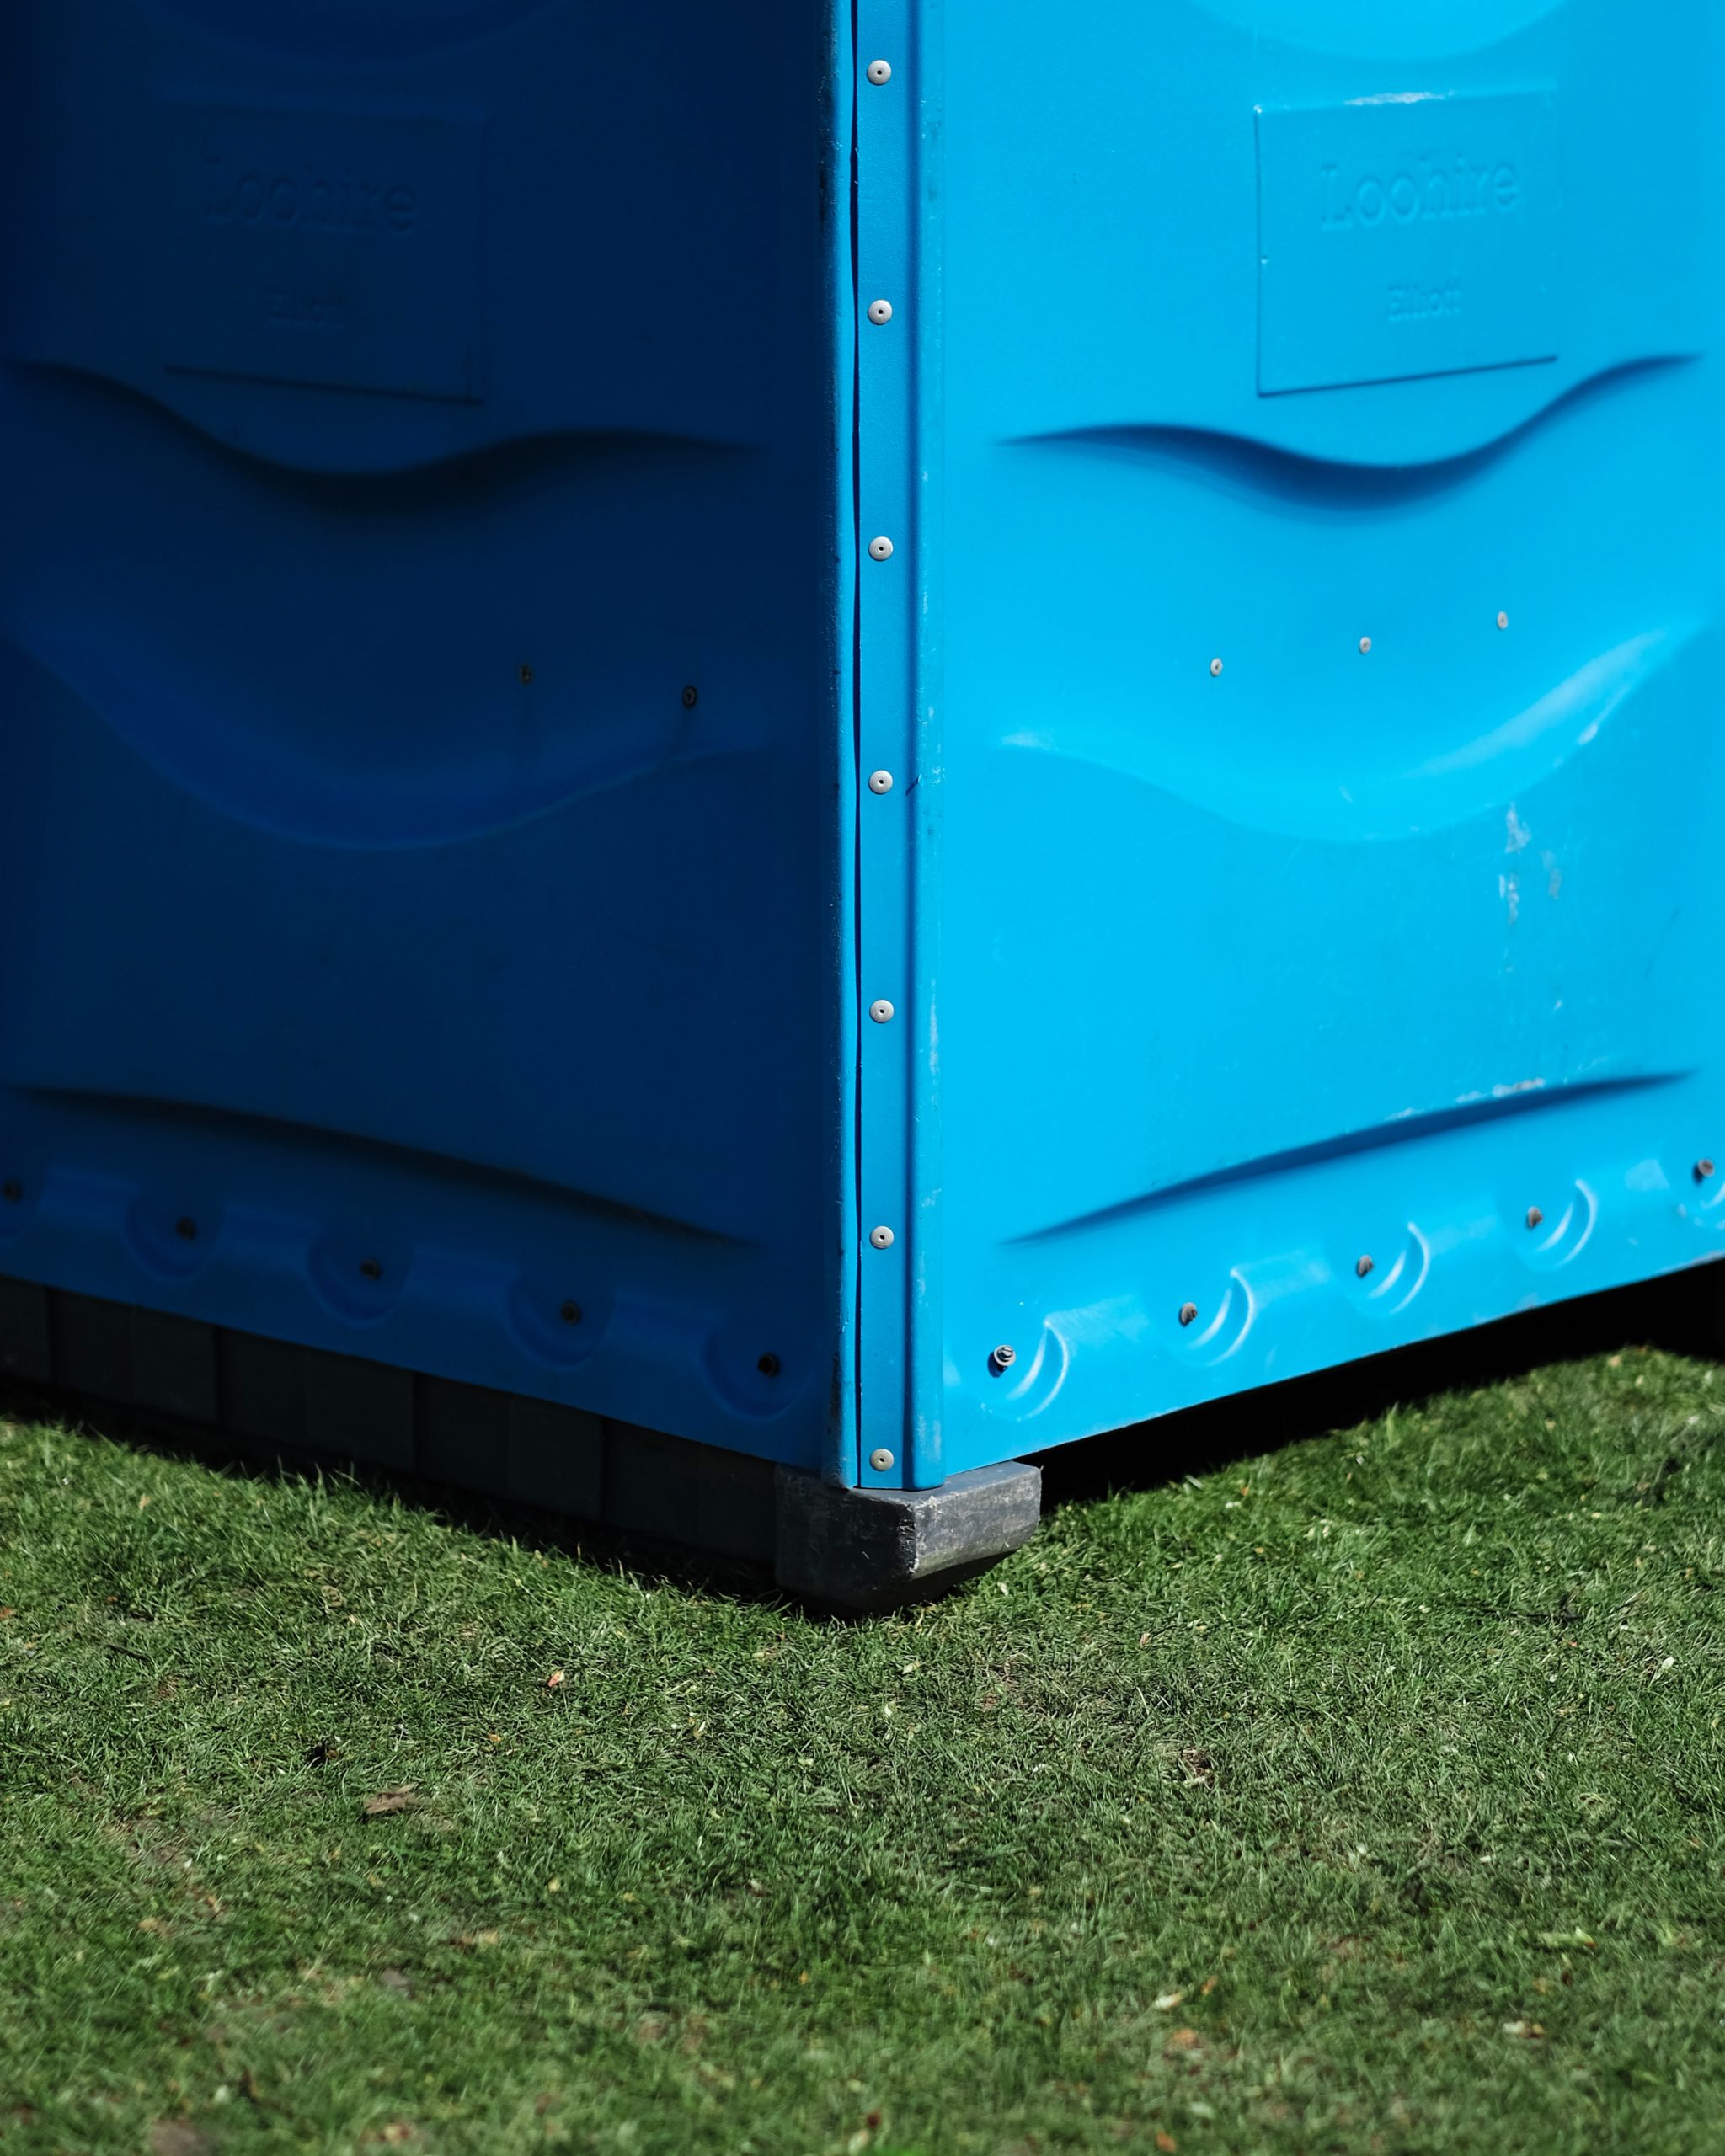 What You Need To Know About The Environmental Benefits Of Portable Toilets